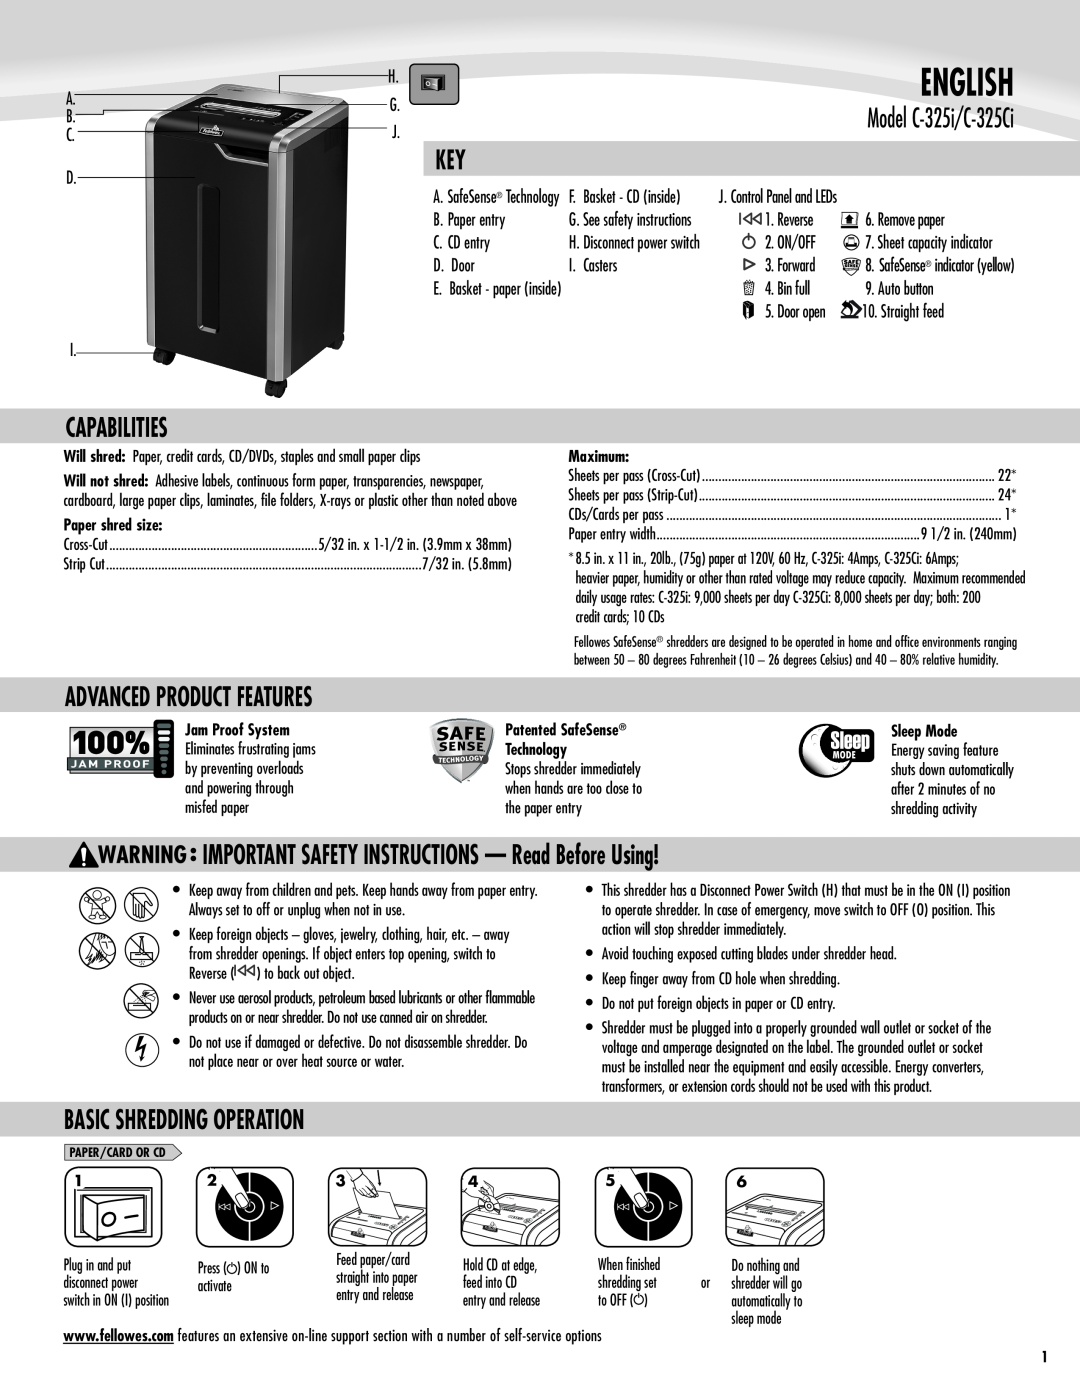 Fellowes C-325I manual Capabilities, Advanced Product Features, IMPORTANT SAFETY INSTRUCTIONS - Read Before Using, English 